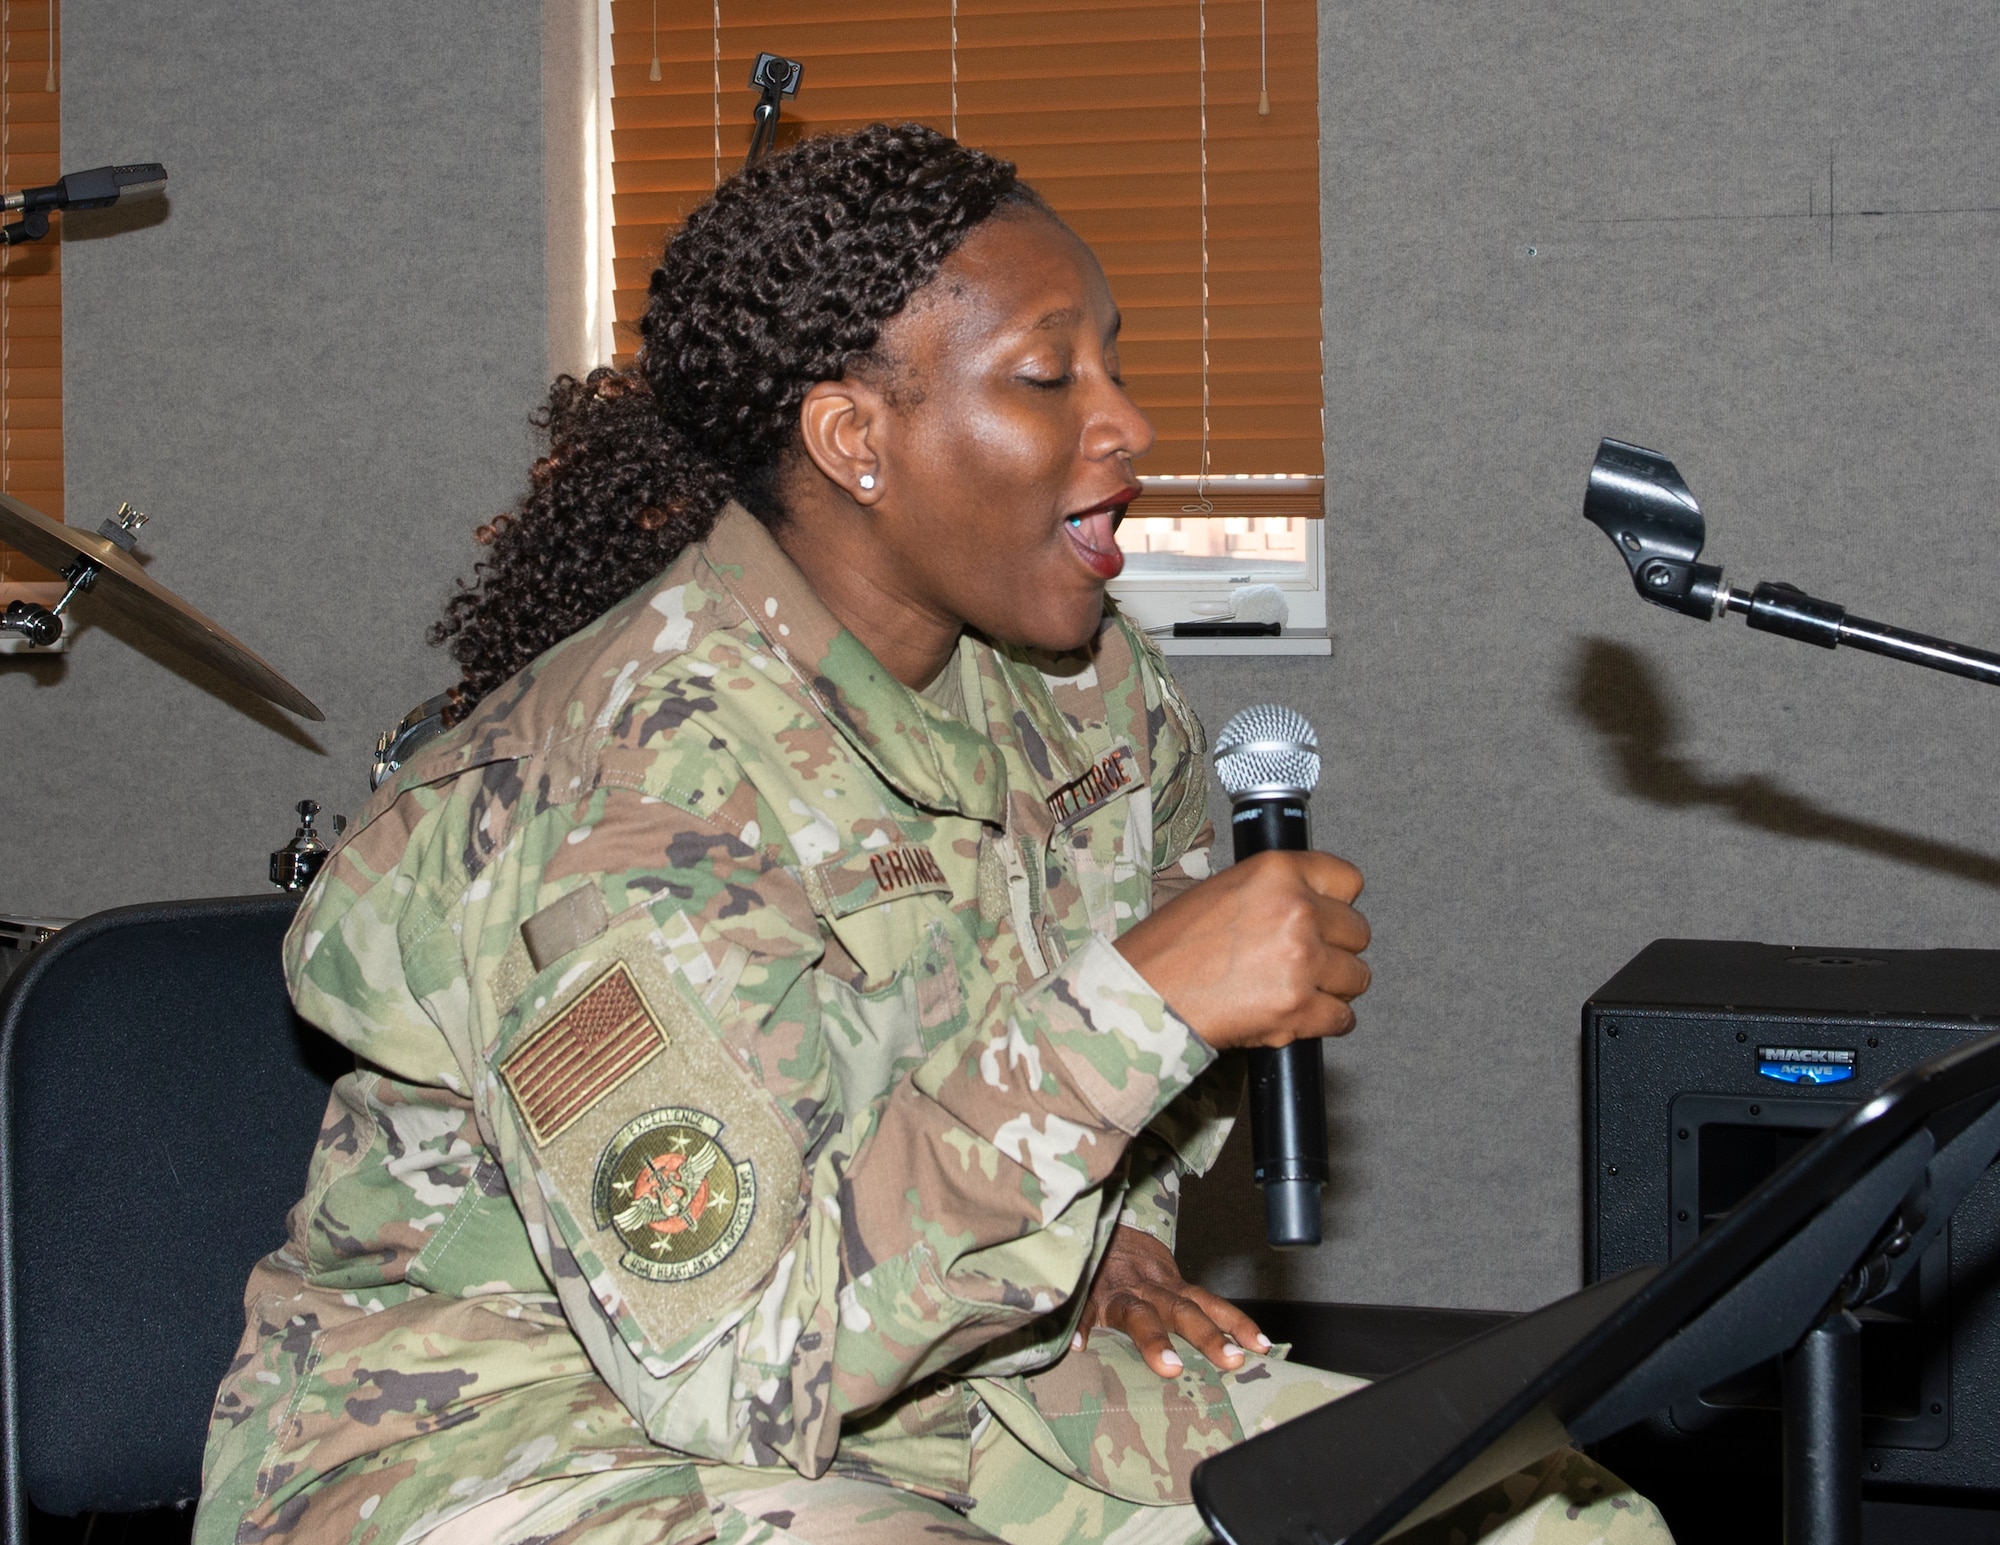 female airman sitting holding a microphone in her hand singing